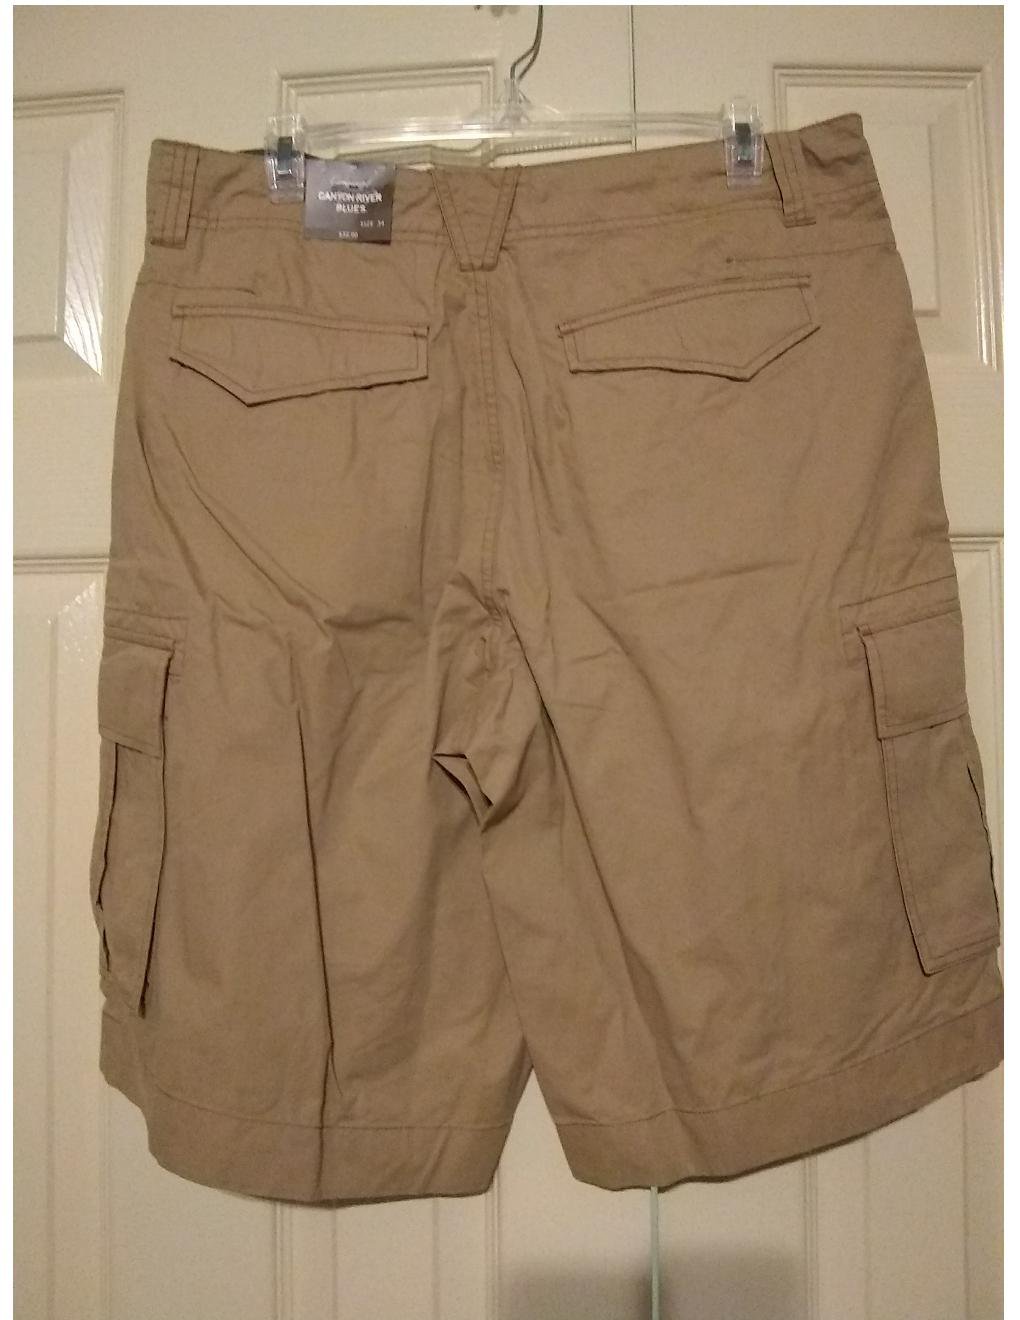 CRB Canyon River Blues Mens Size 34 Classic Cargo Shorts Flat Front ...